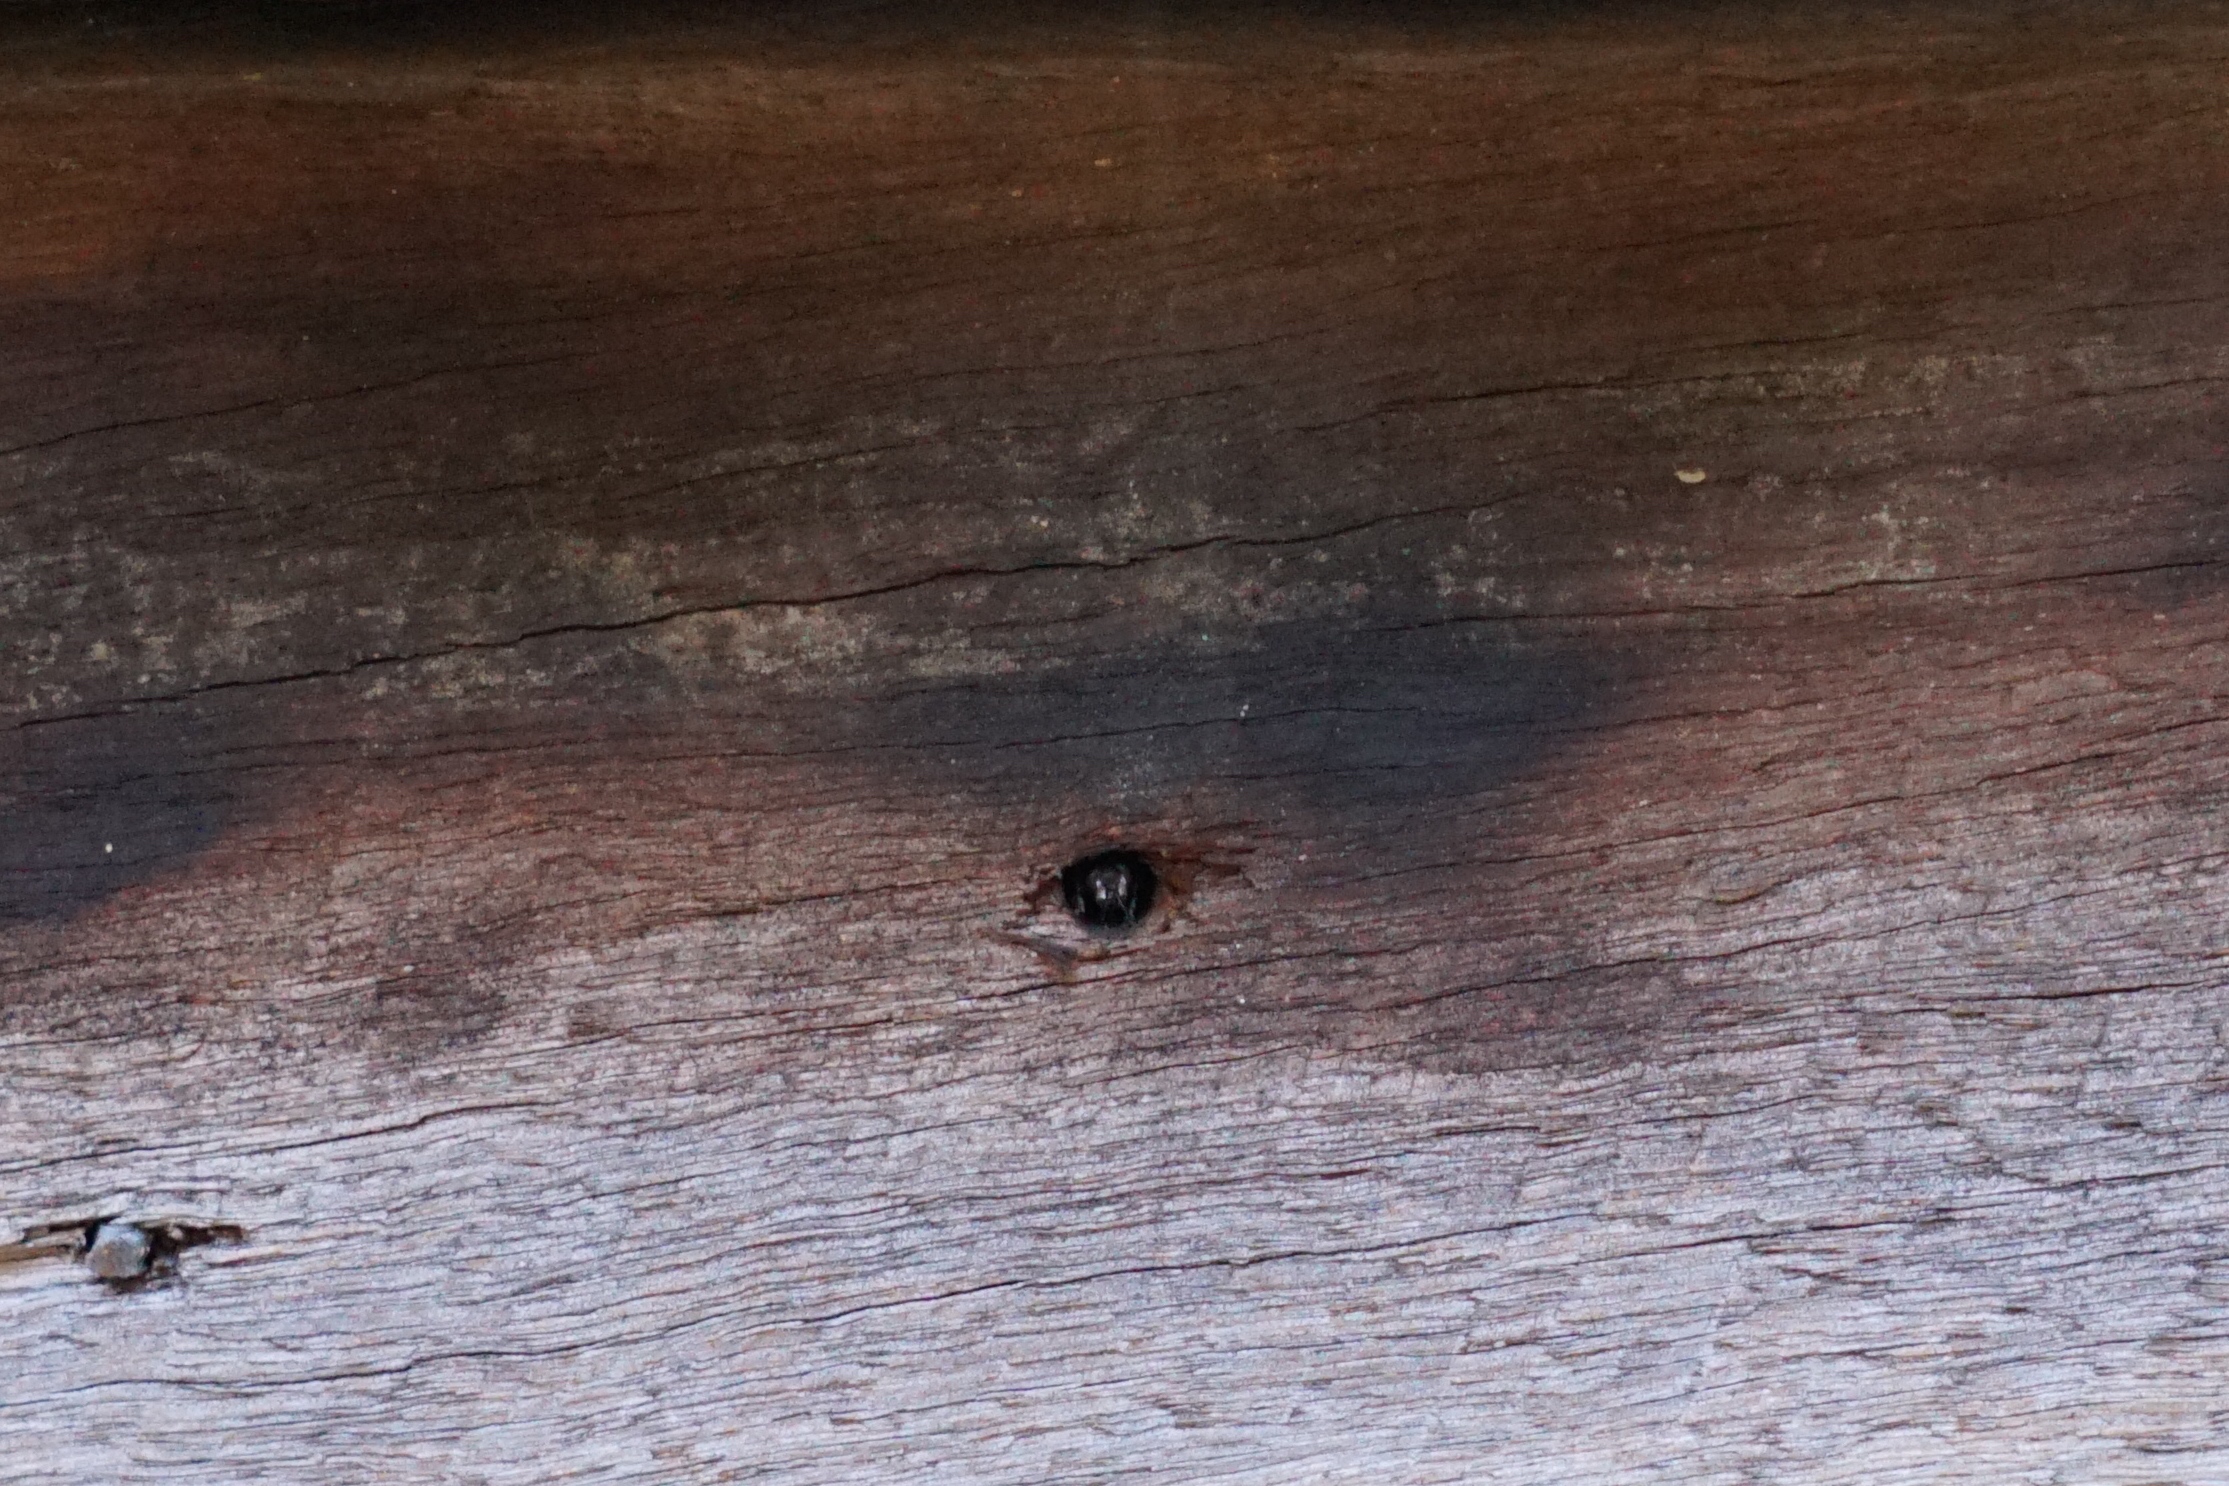 Native bee peeping out of the hole